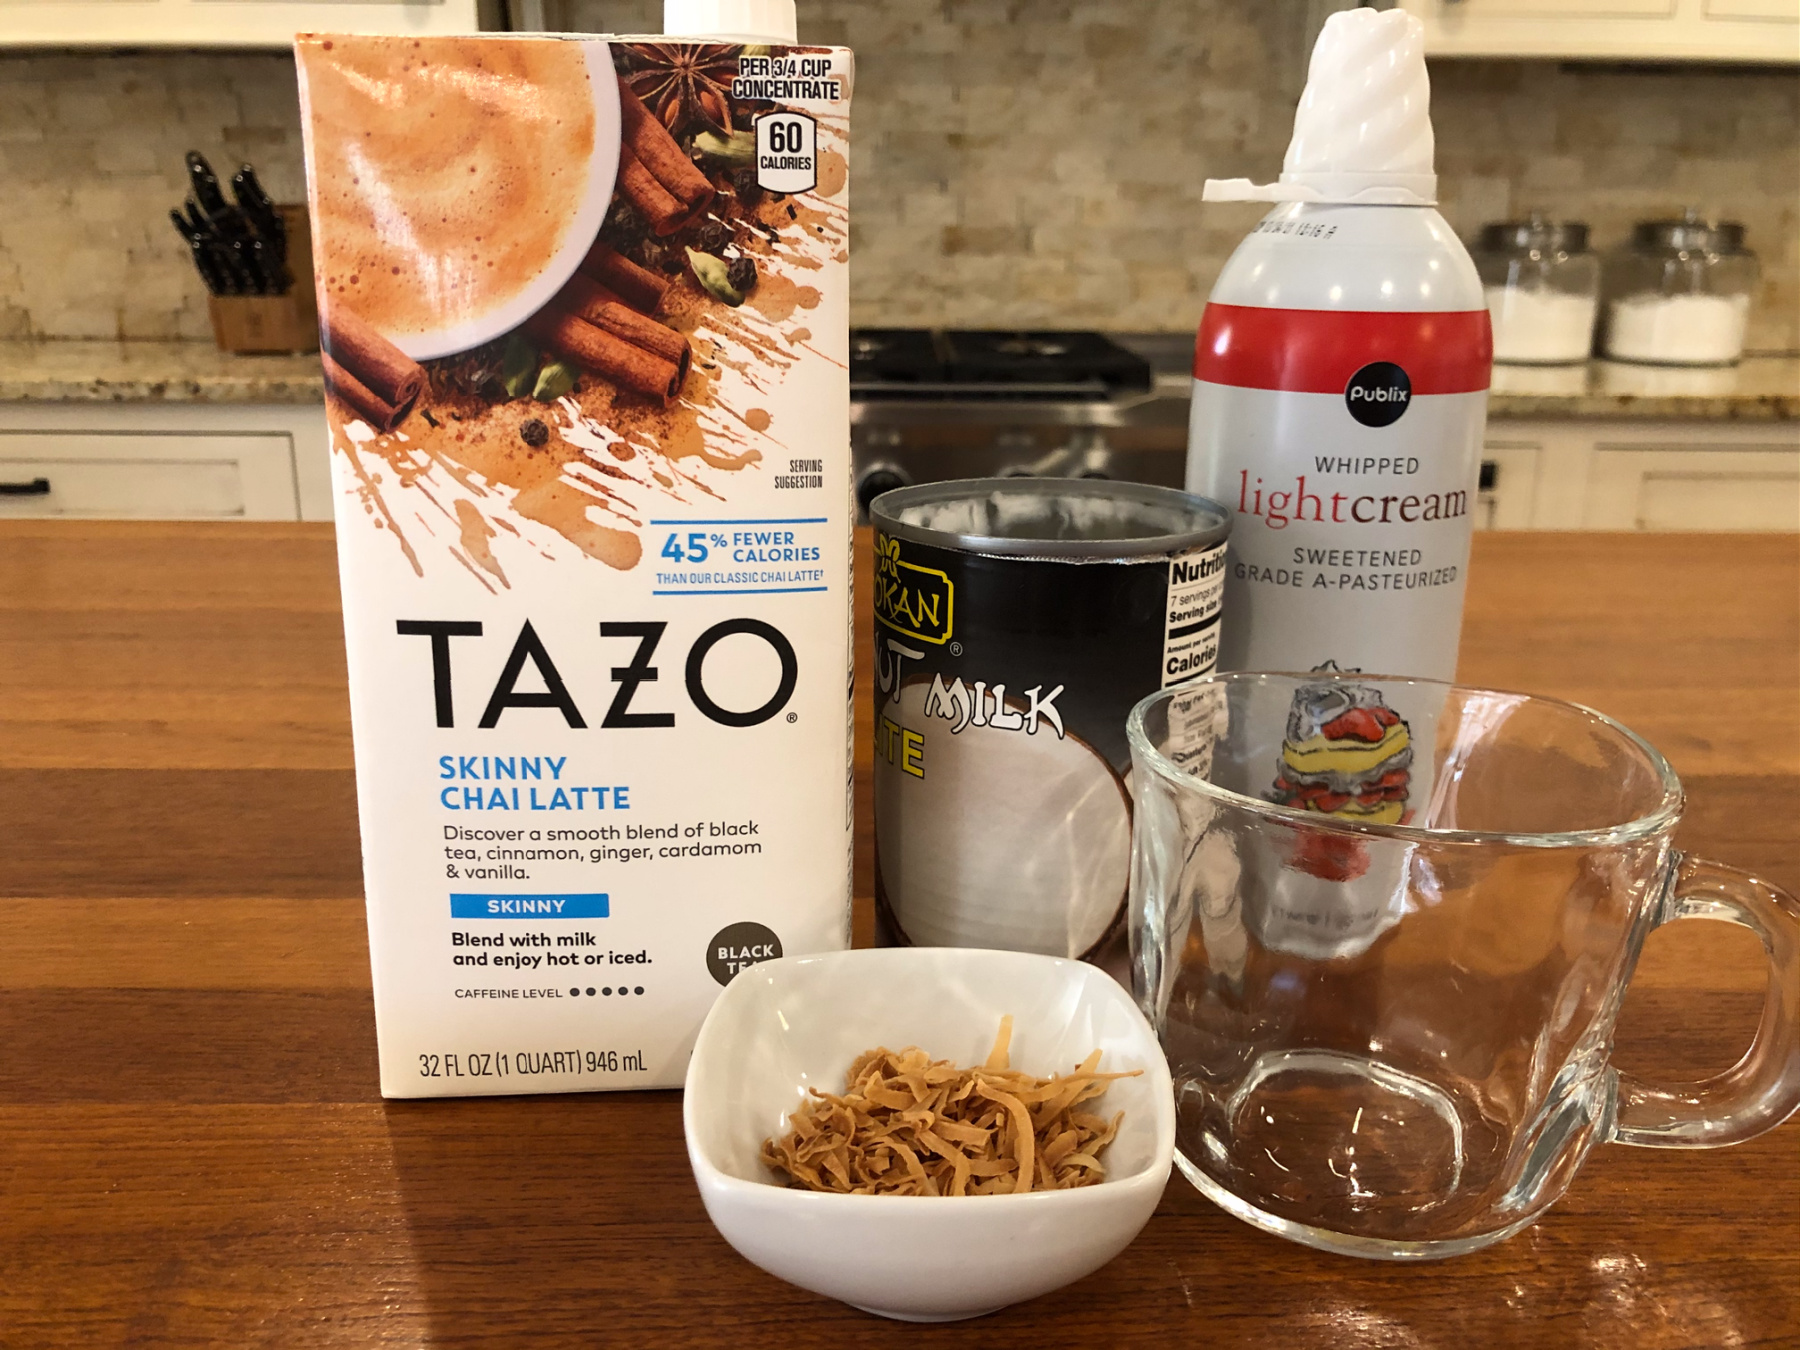 Try This Easy Coconut Chia Latte & Don't Miss Fantastic Savings On TAZO Products At Publix on I Heart Publix 1